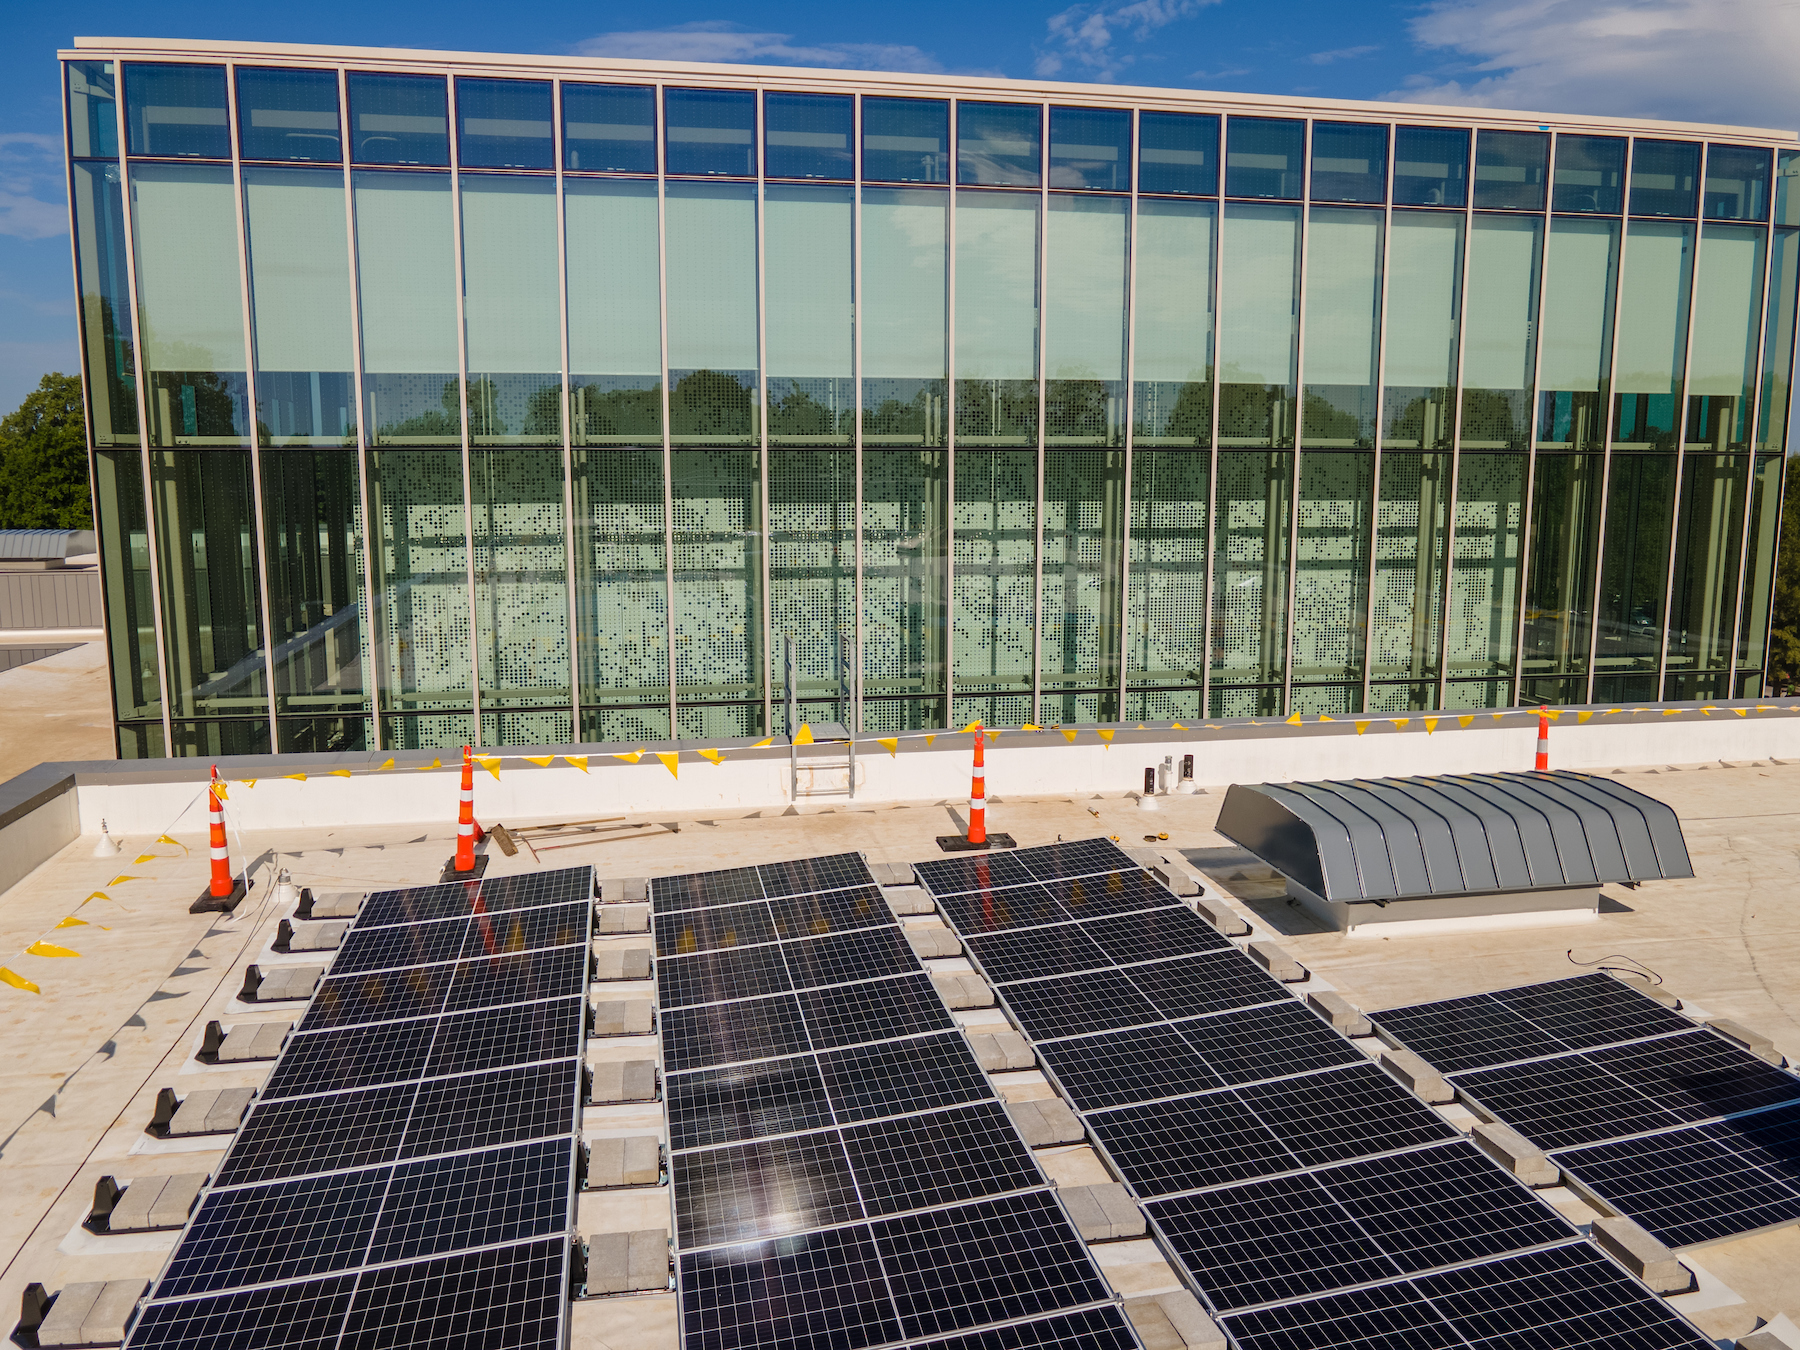 Solar Has an Impact at Jack C. Taylor Visitor Center